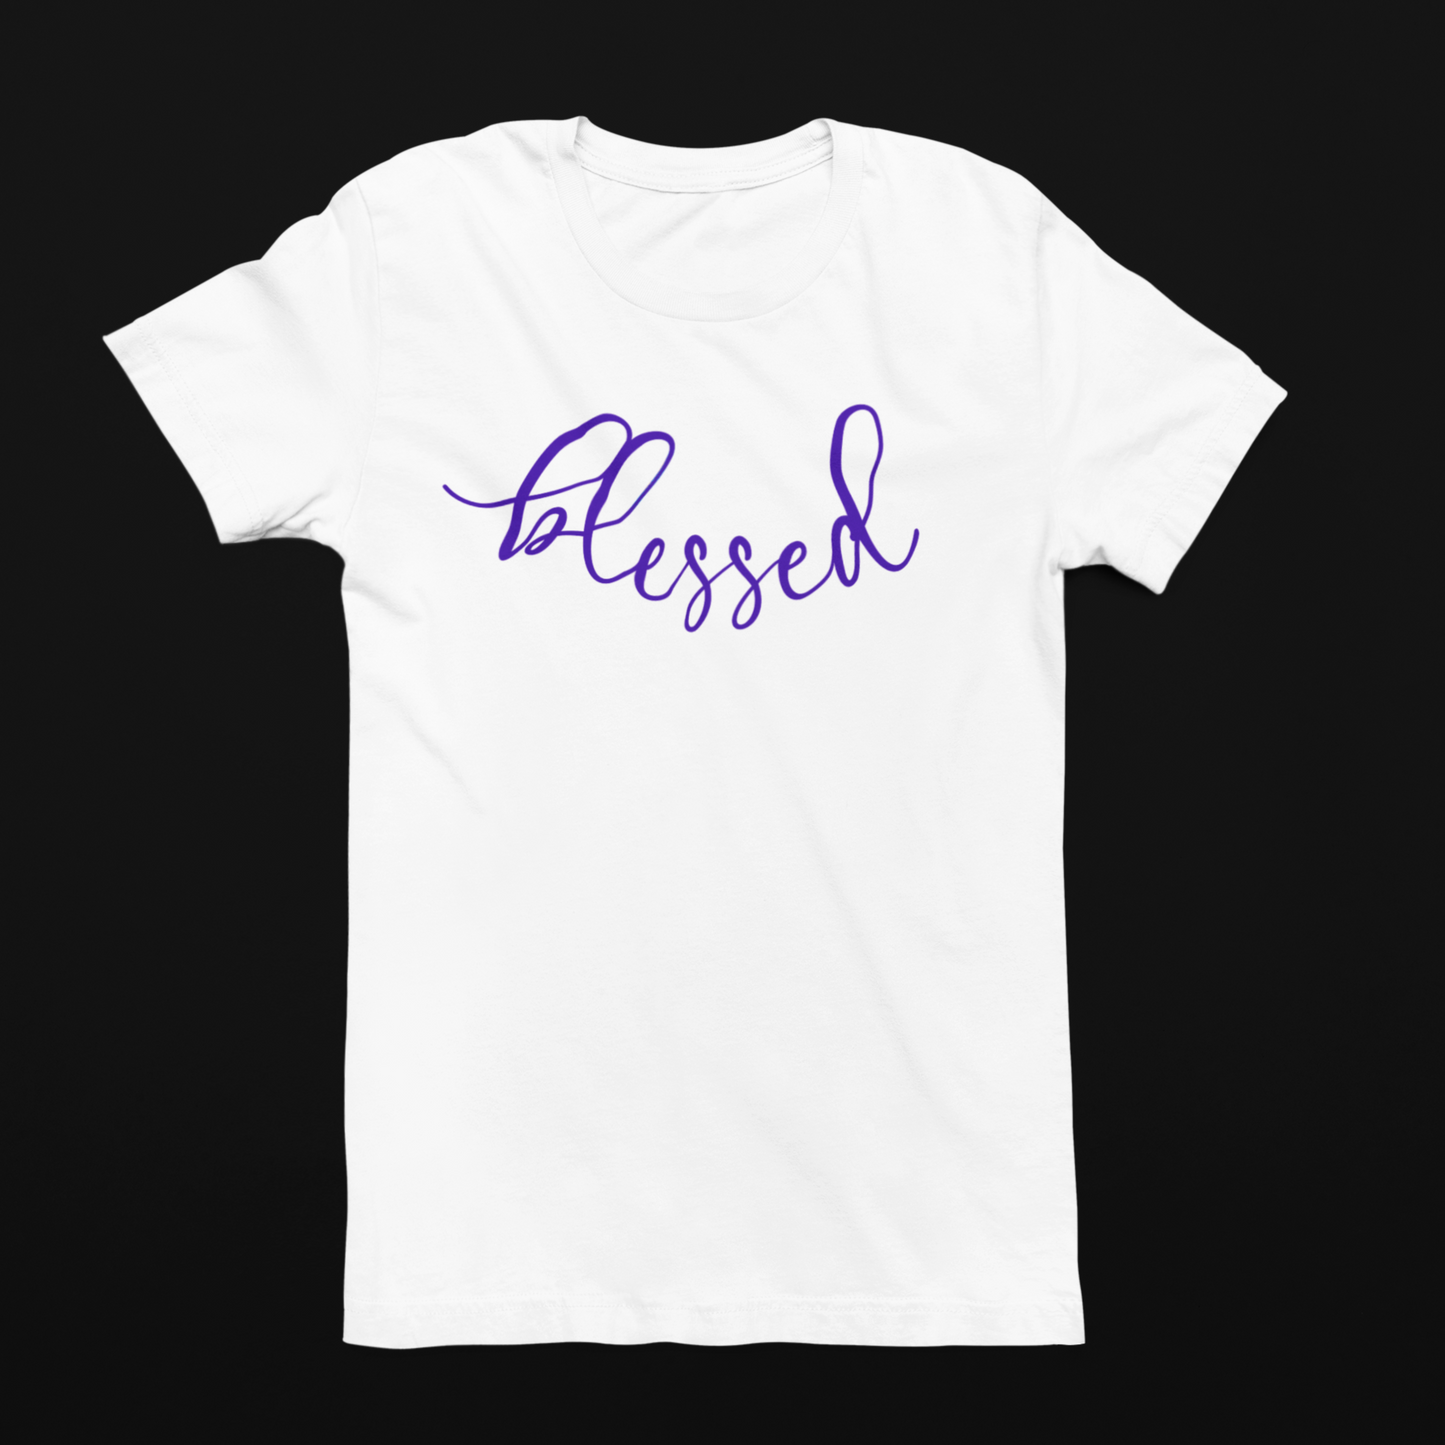 Blue and White Blessed Tee